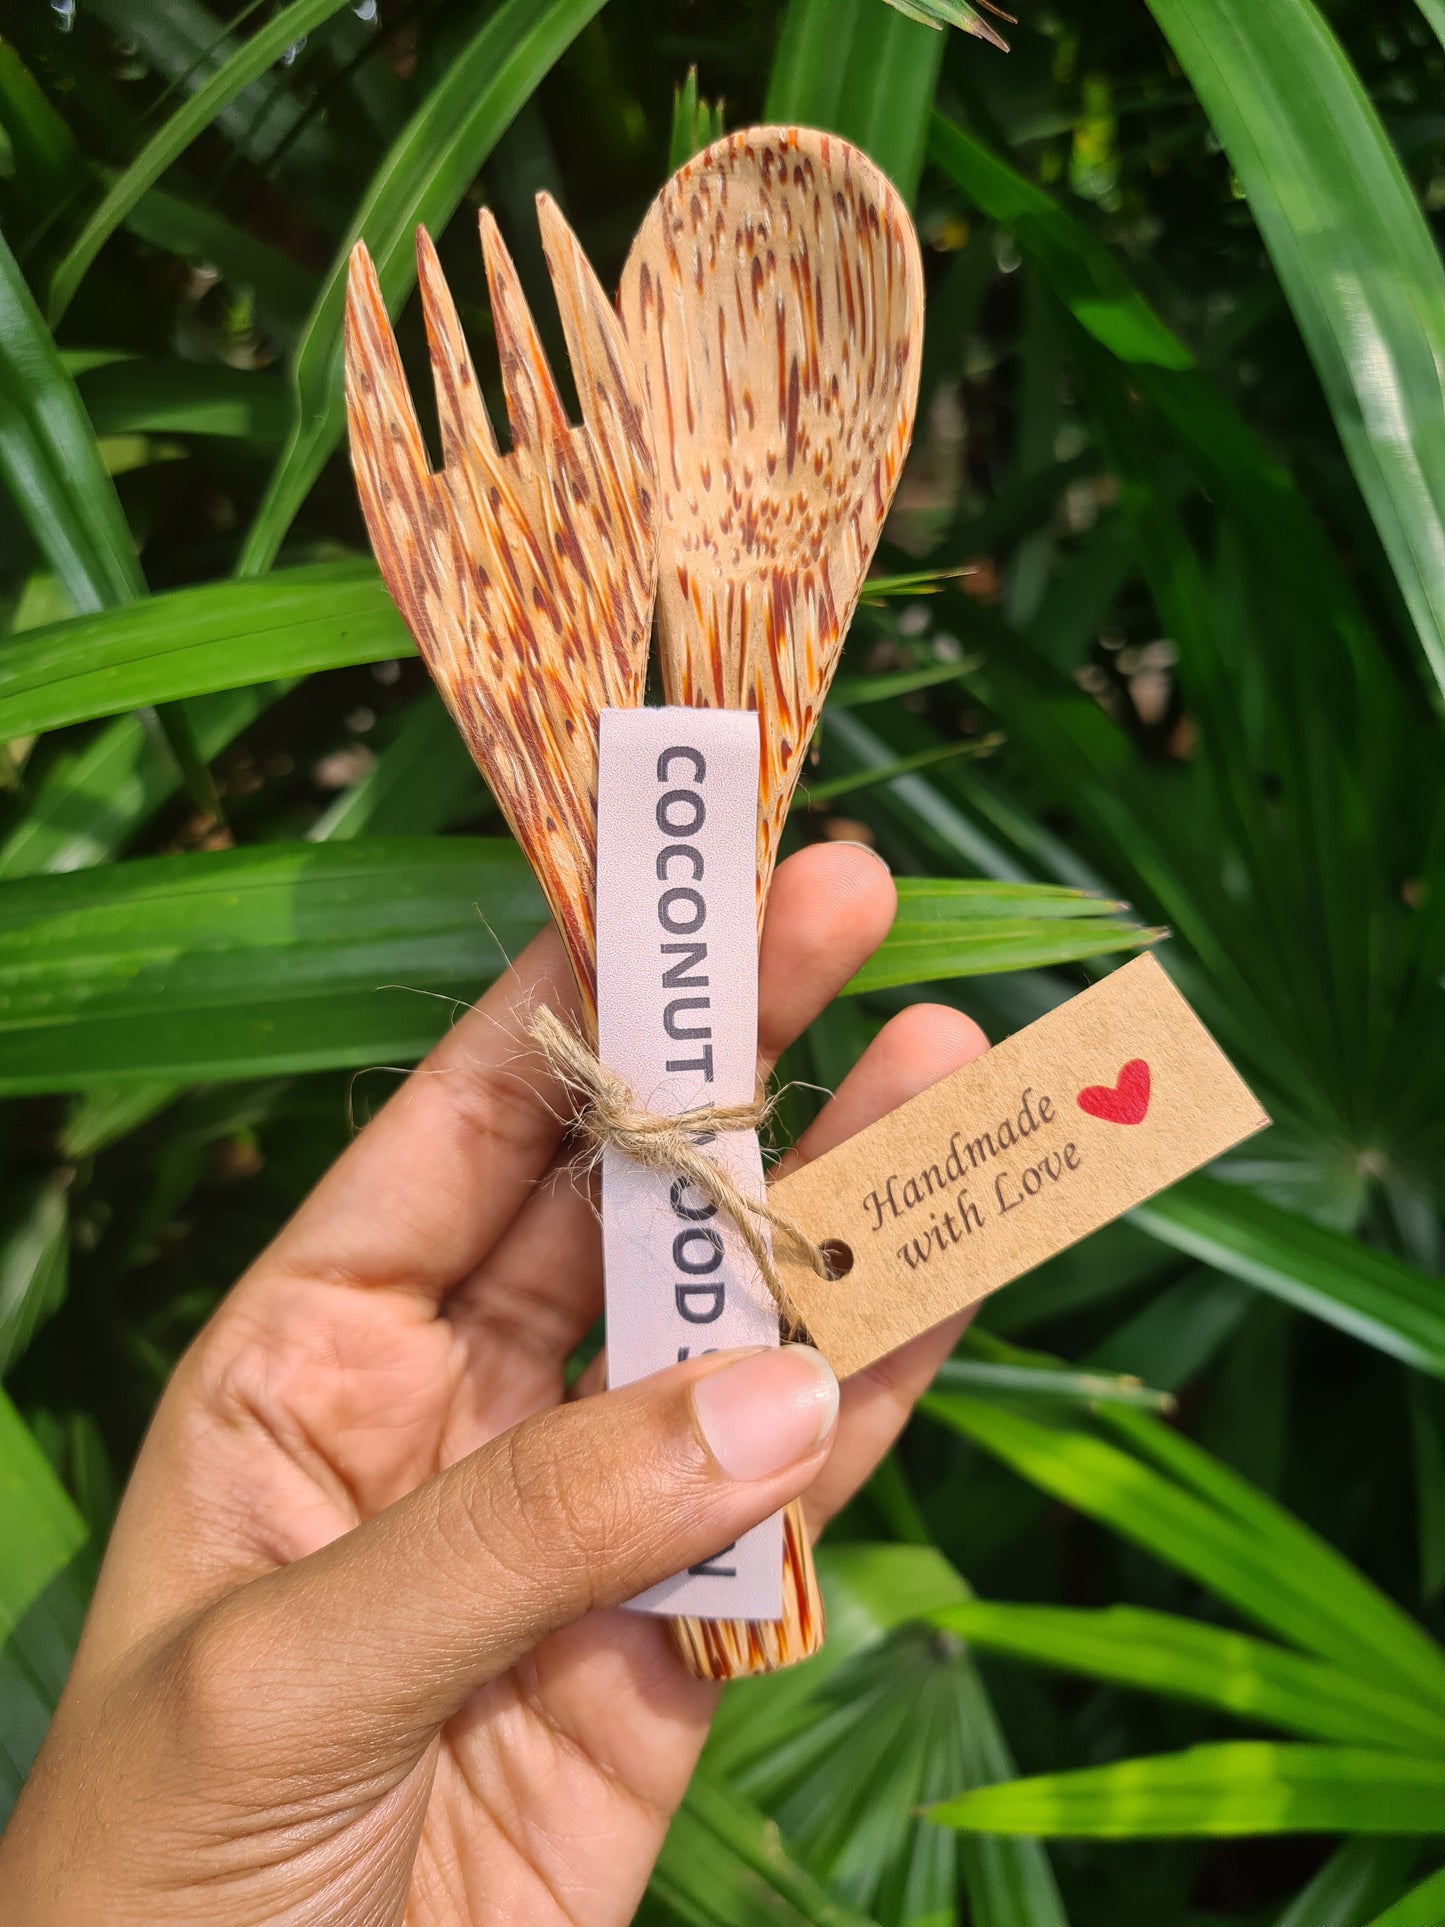 Thenga Coconut wood Spoon & Fork (2 Spoon + 2 Fork) | Eco Friendly, Natural & Handmade